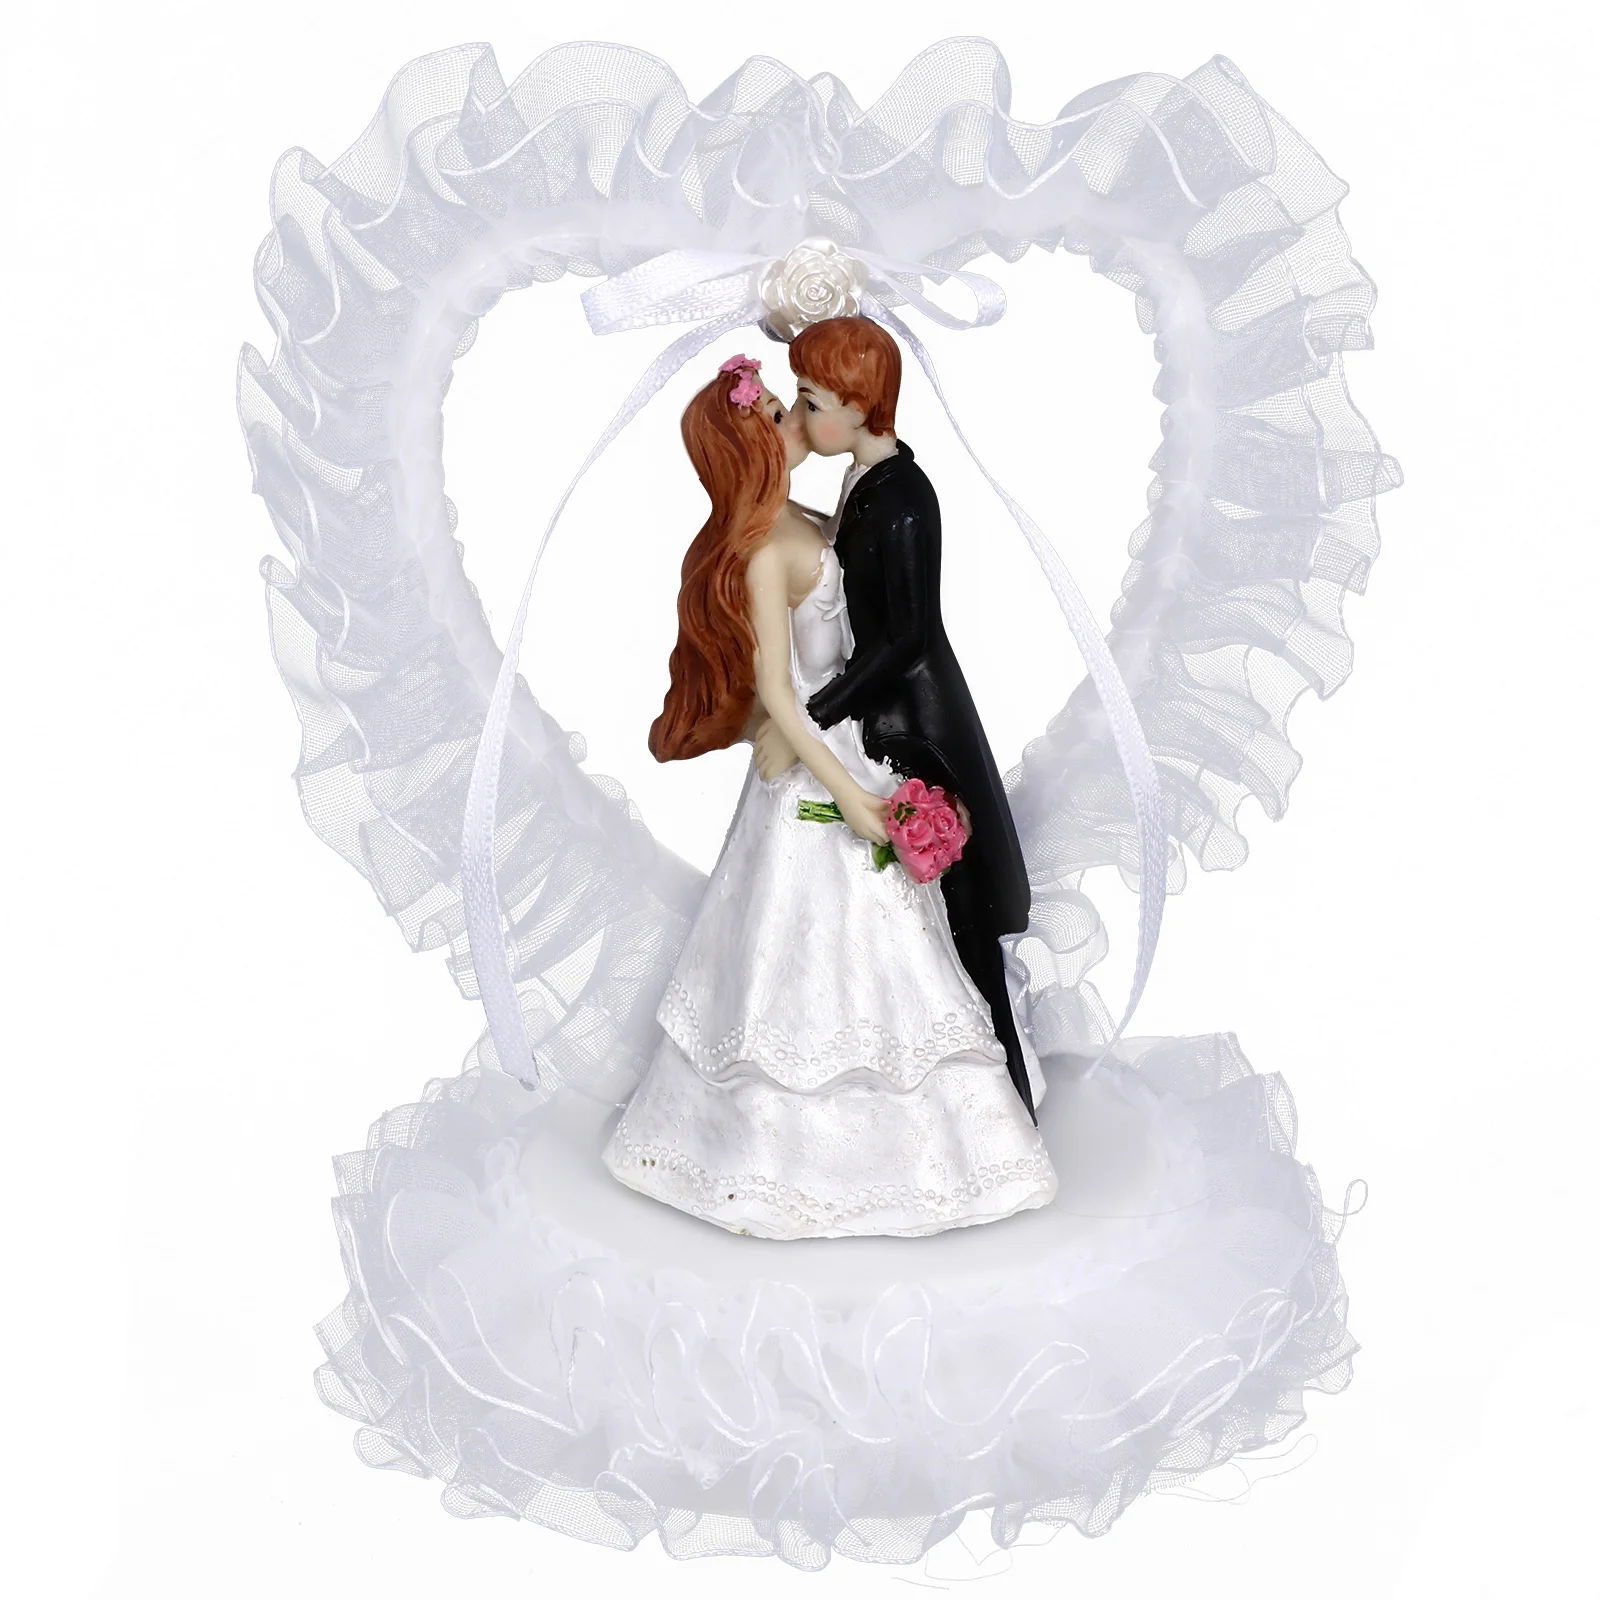 

bride groom figurines wedding cake topper party heart shaped cake topper party for valentines day wedding decor white